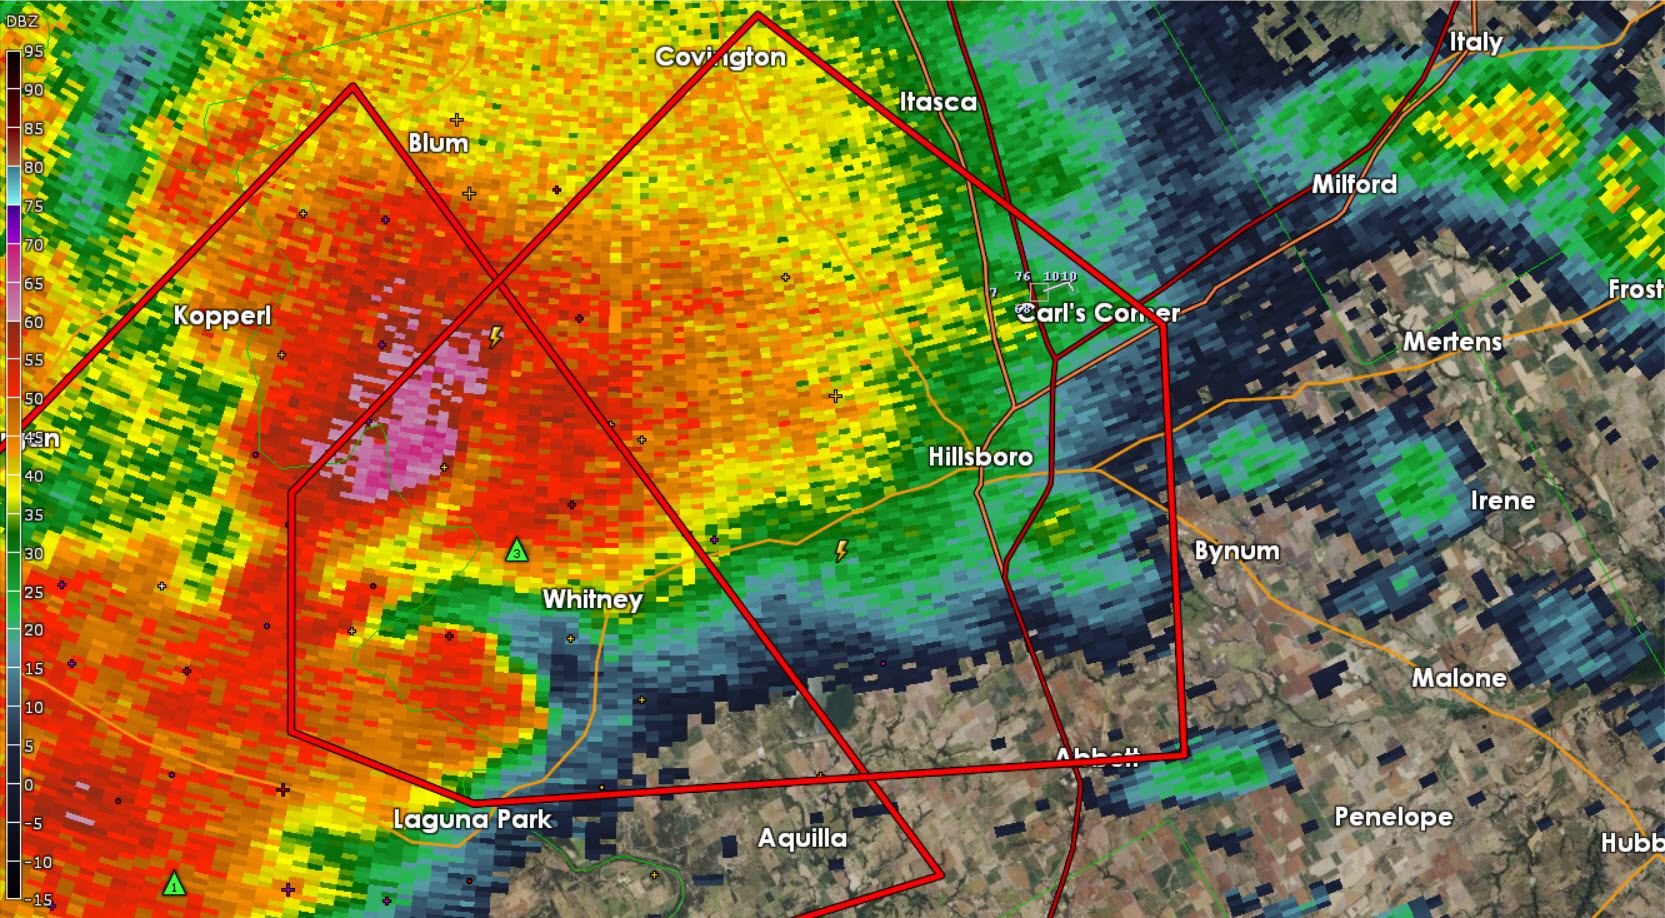 Tornado Warning for Hill County including Hillsboro until 6:30 PM